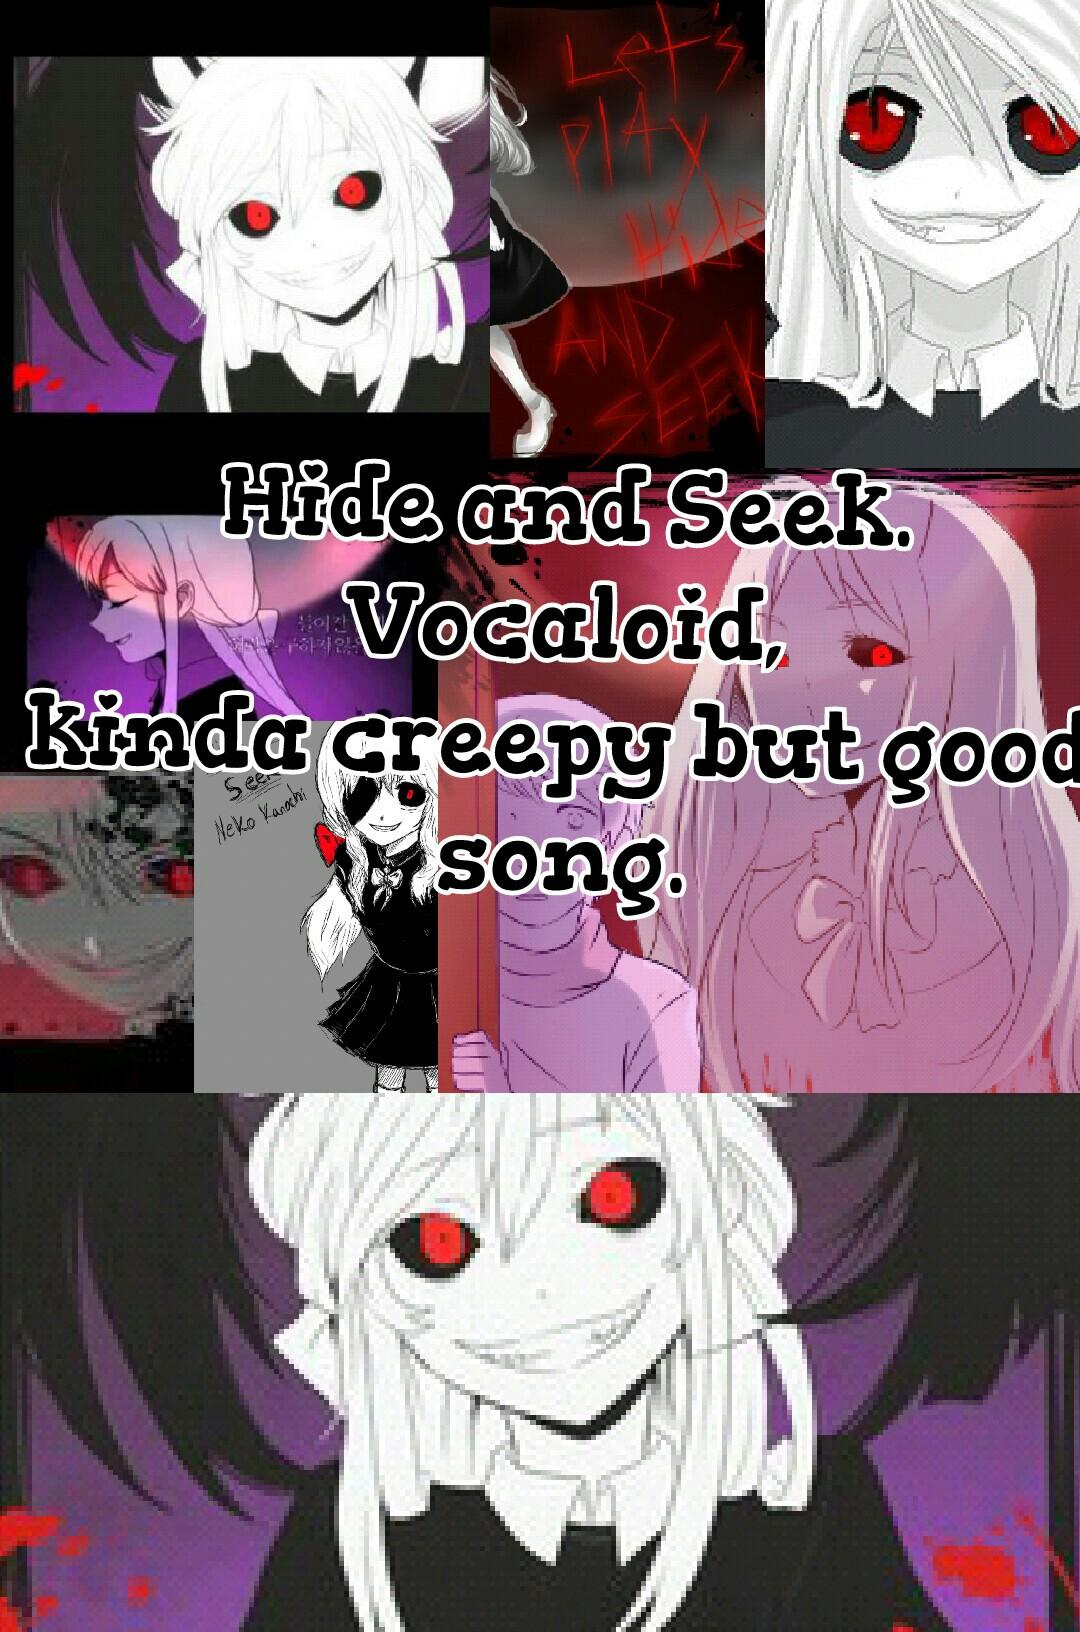 Hide and Seek.
Vocaloid,
kinda creepy but good
song.